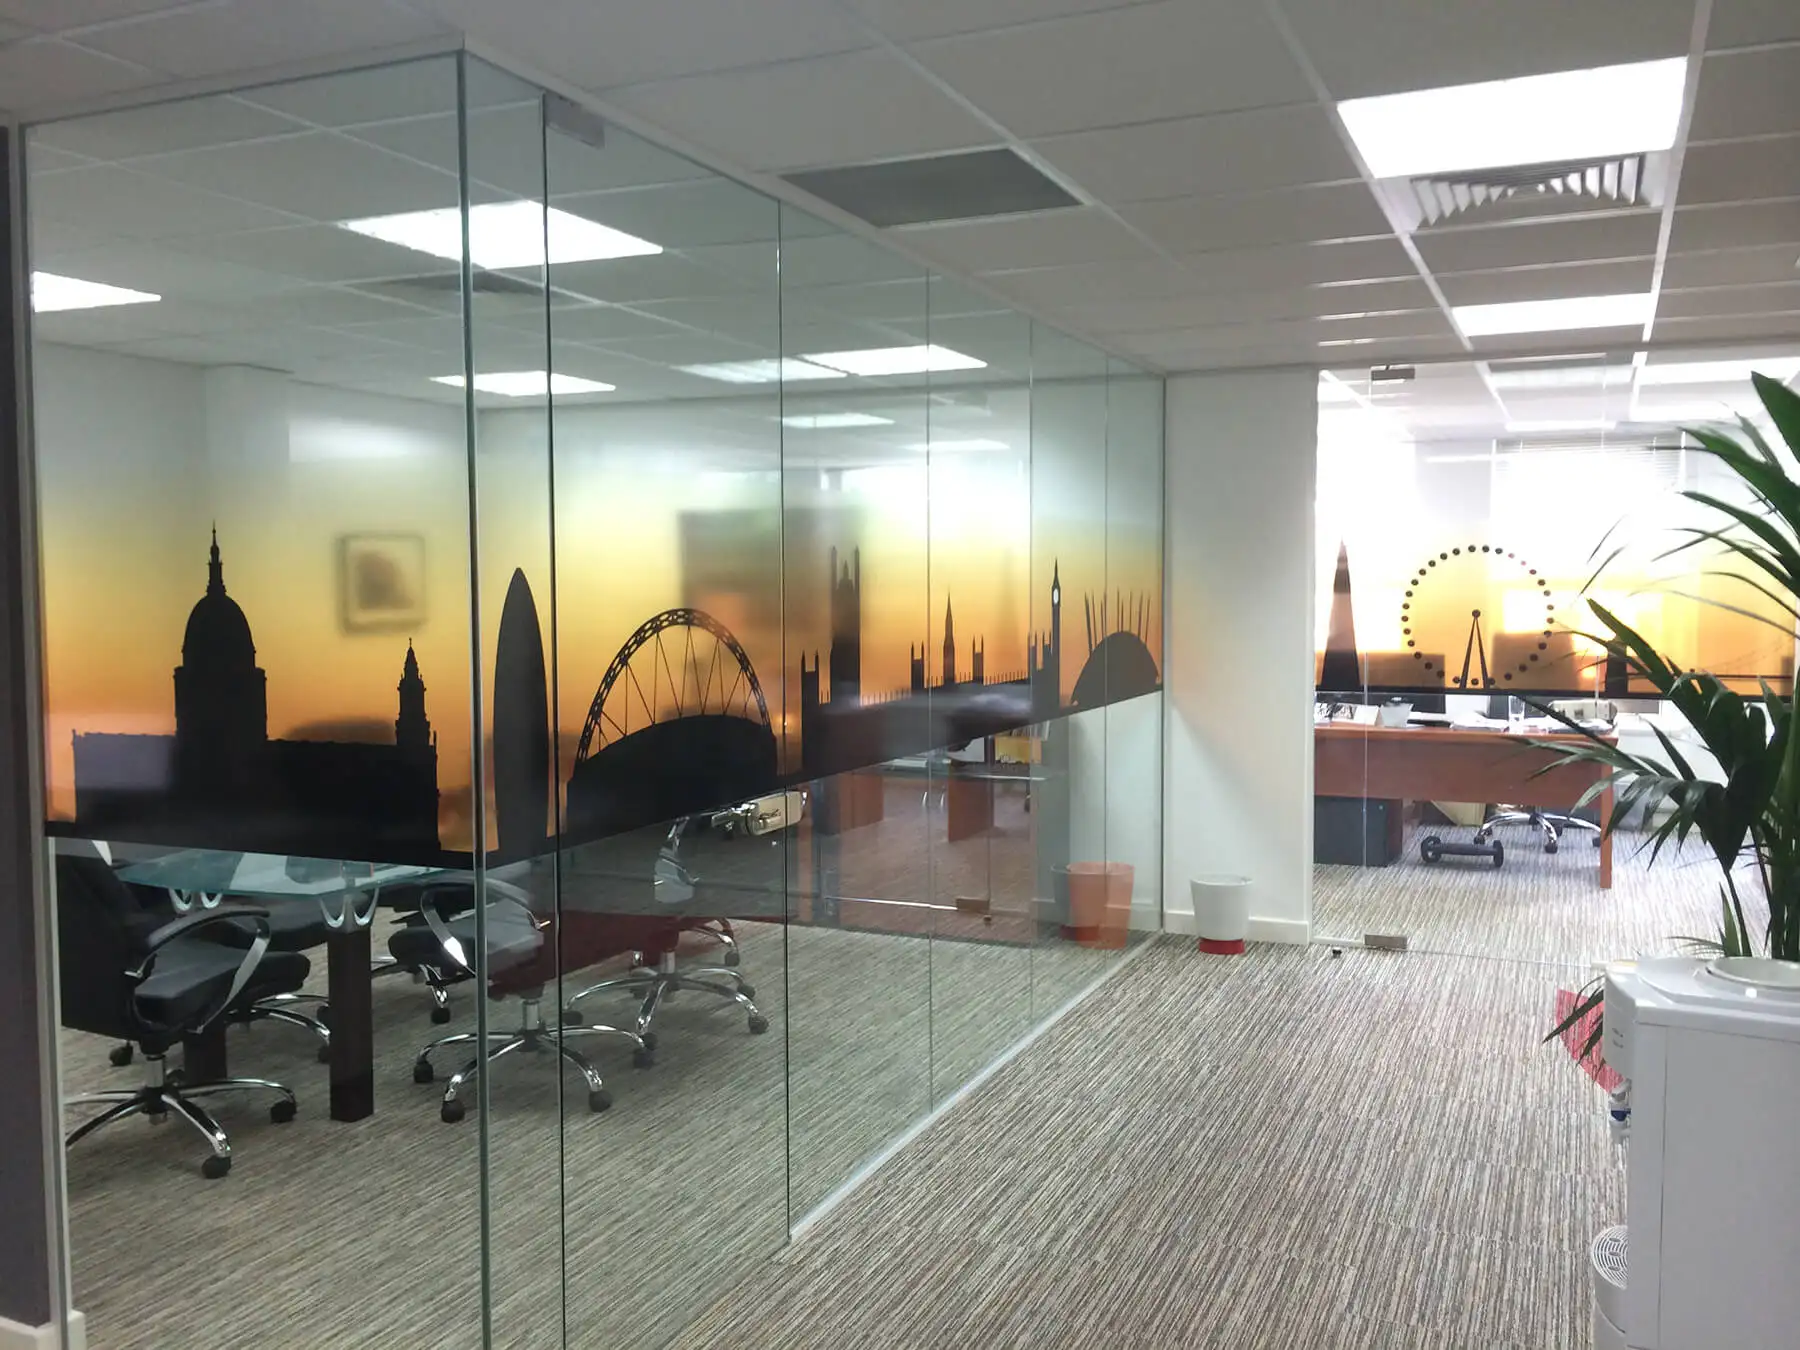 Office work space and meeting area space divided with glass partitions